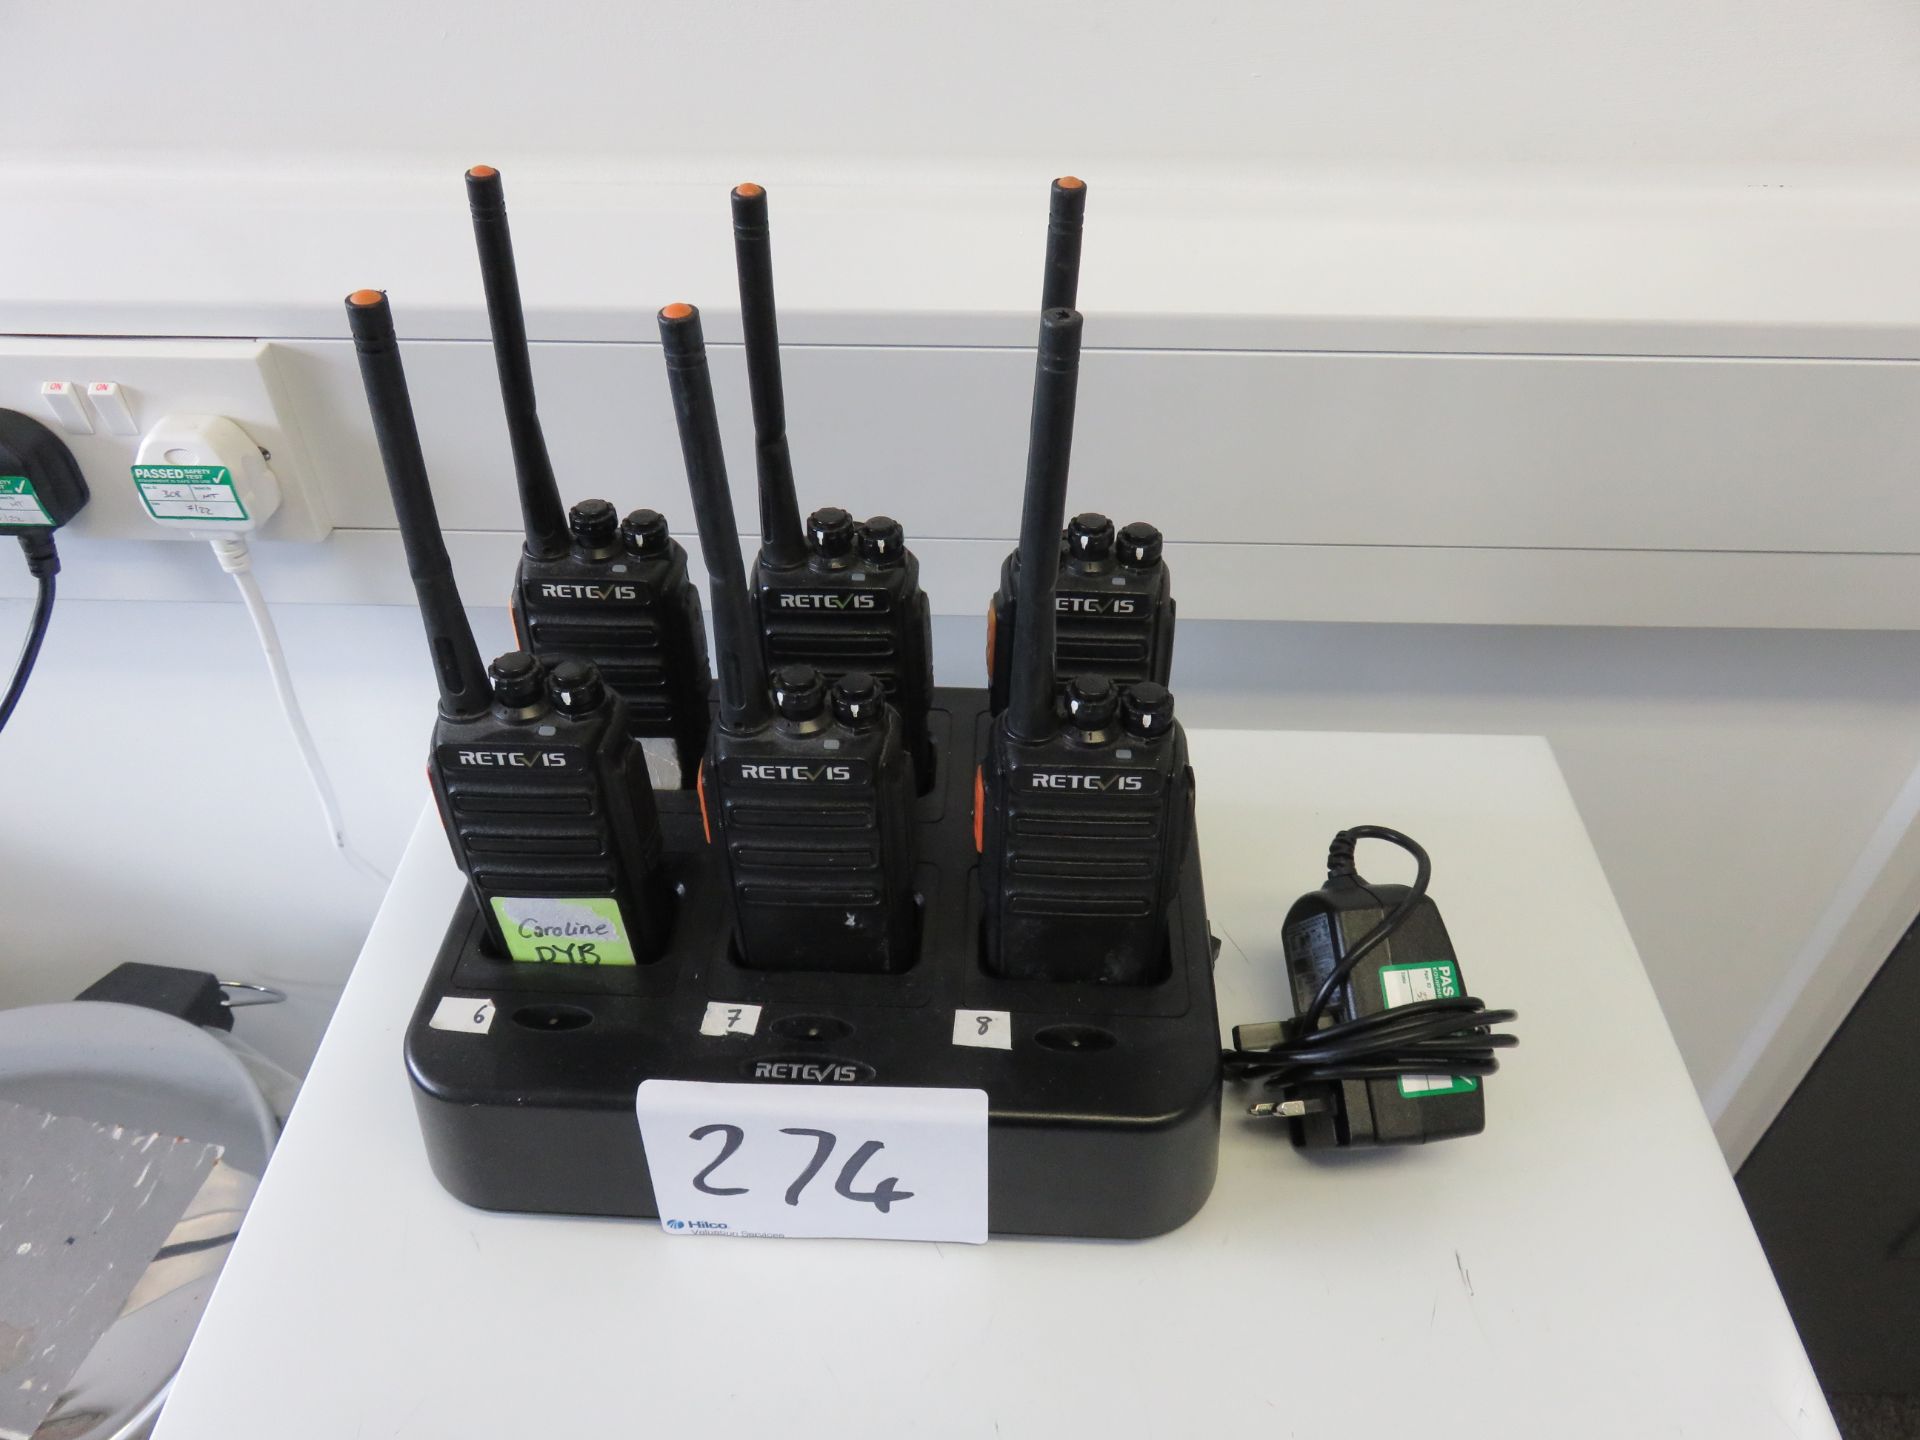 (6) Retc 15 RT24 Two Way Radios with Six Position Charger As Lotted